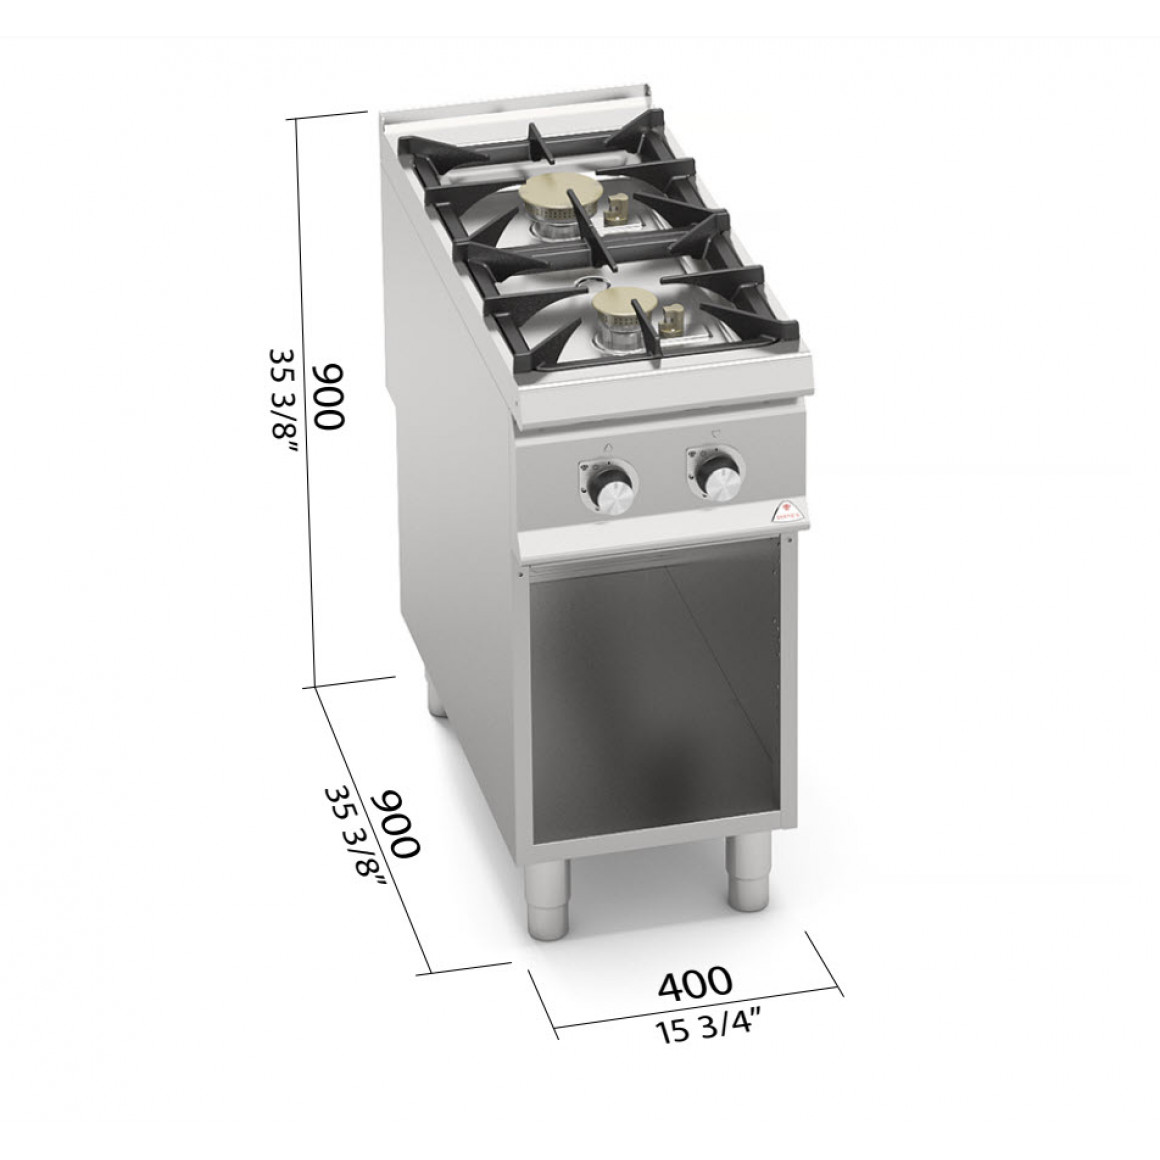 Gas cooker - cast iron grill SG9F2MPS